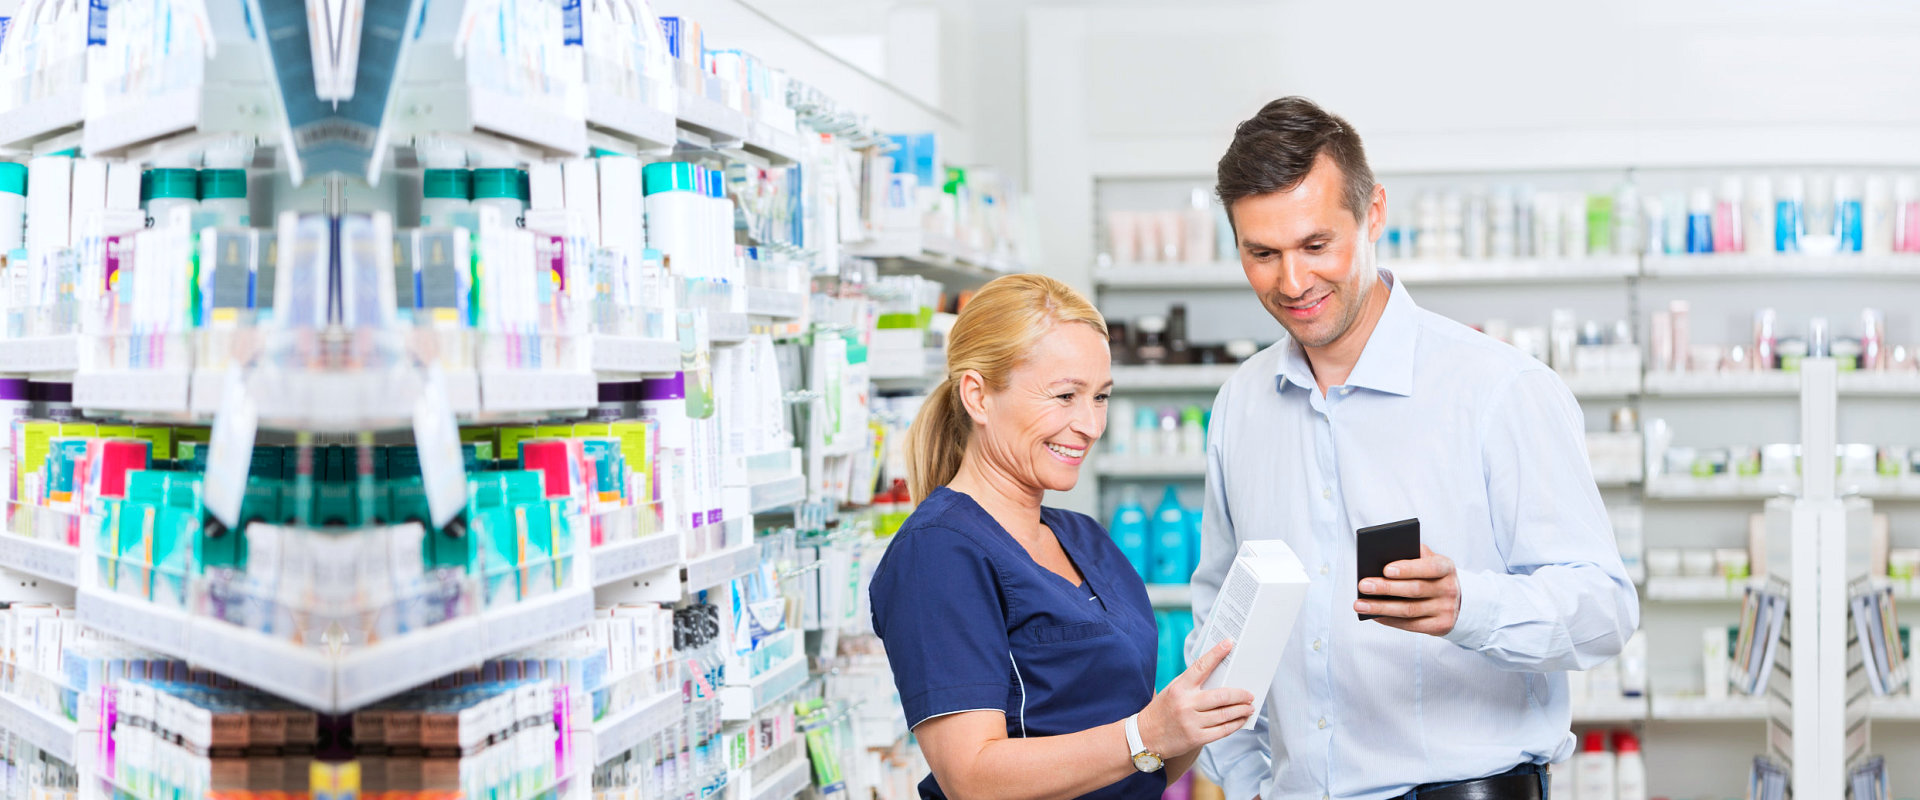 Smiling male customer using mobile phone and a pharmacist